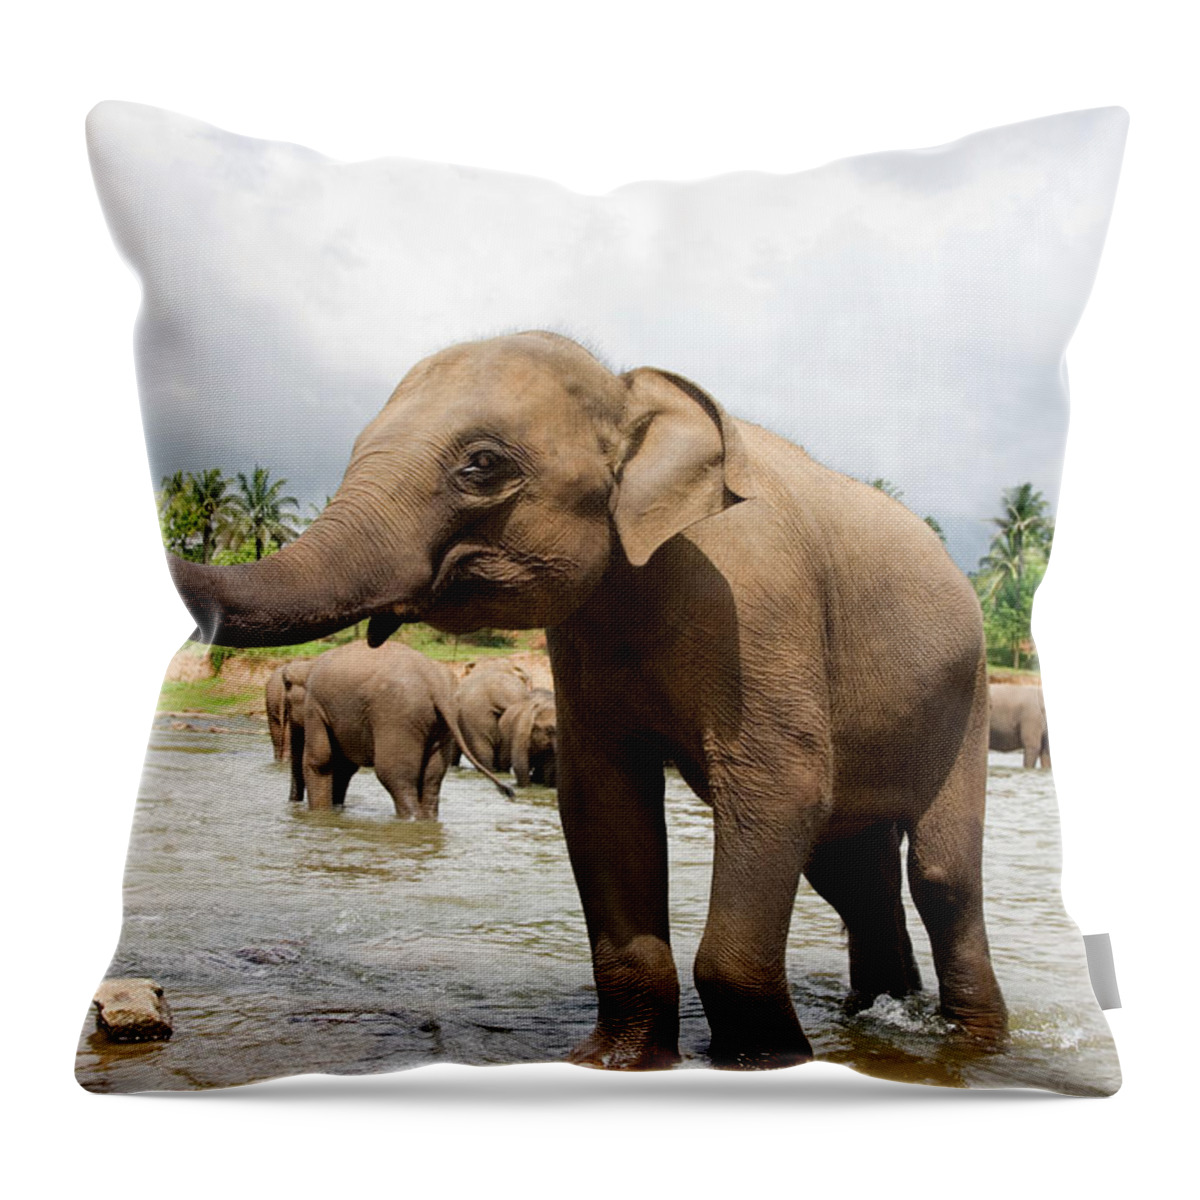 Animals In The Wild Throw Pillow featuring the photograph Elephants In River #2 by Lp7